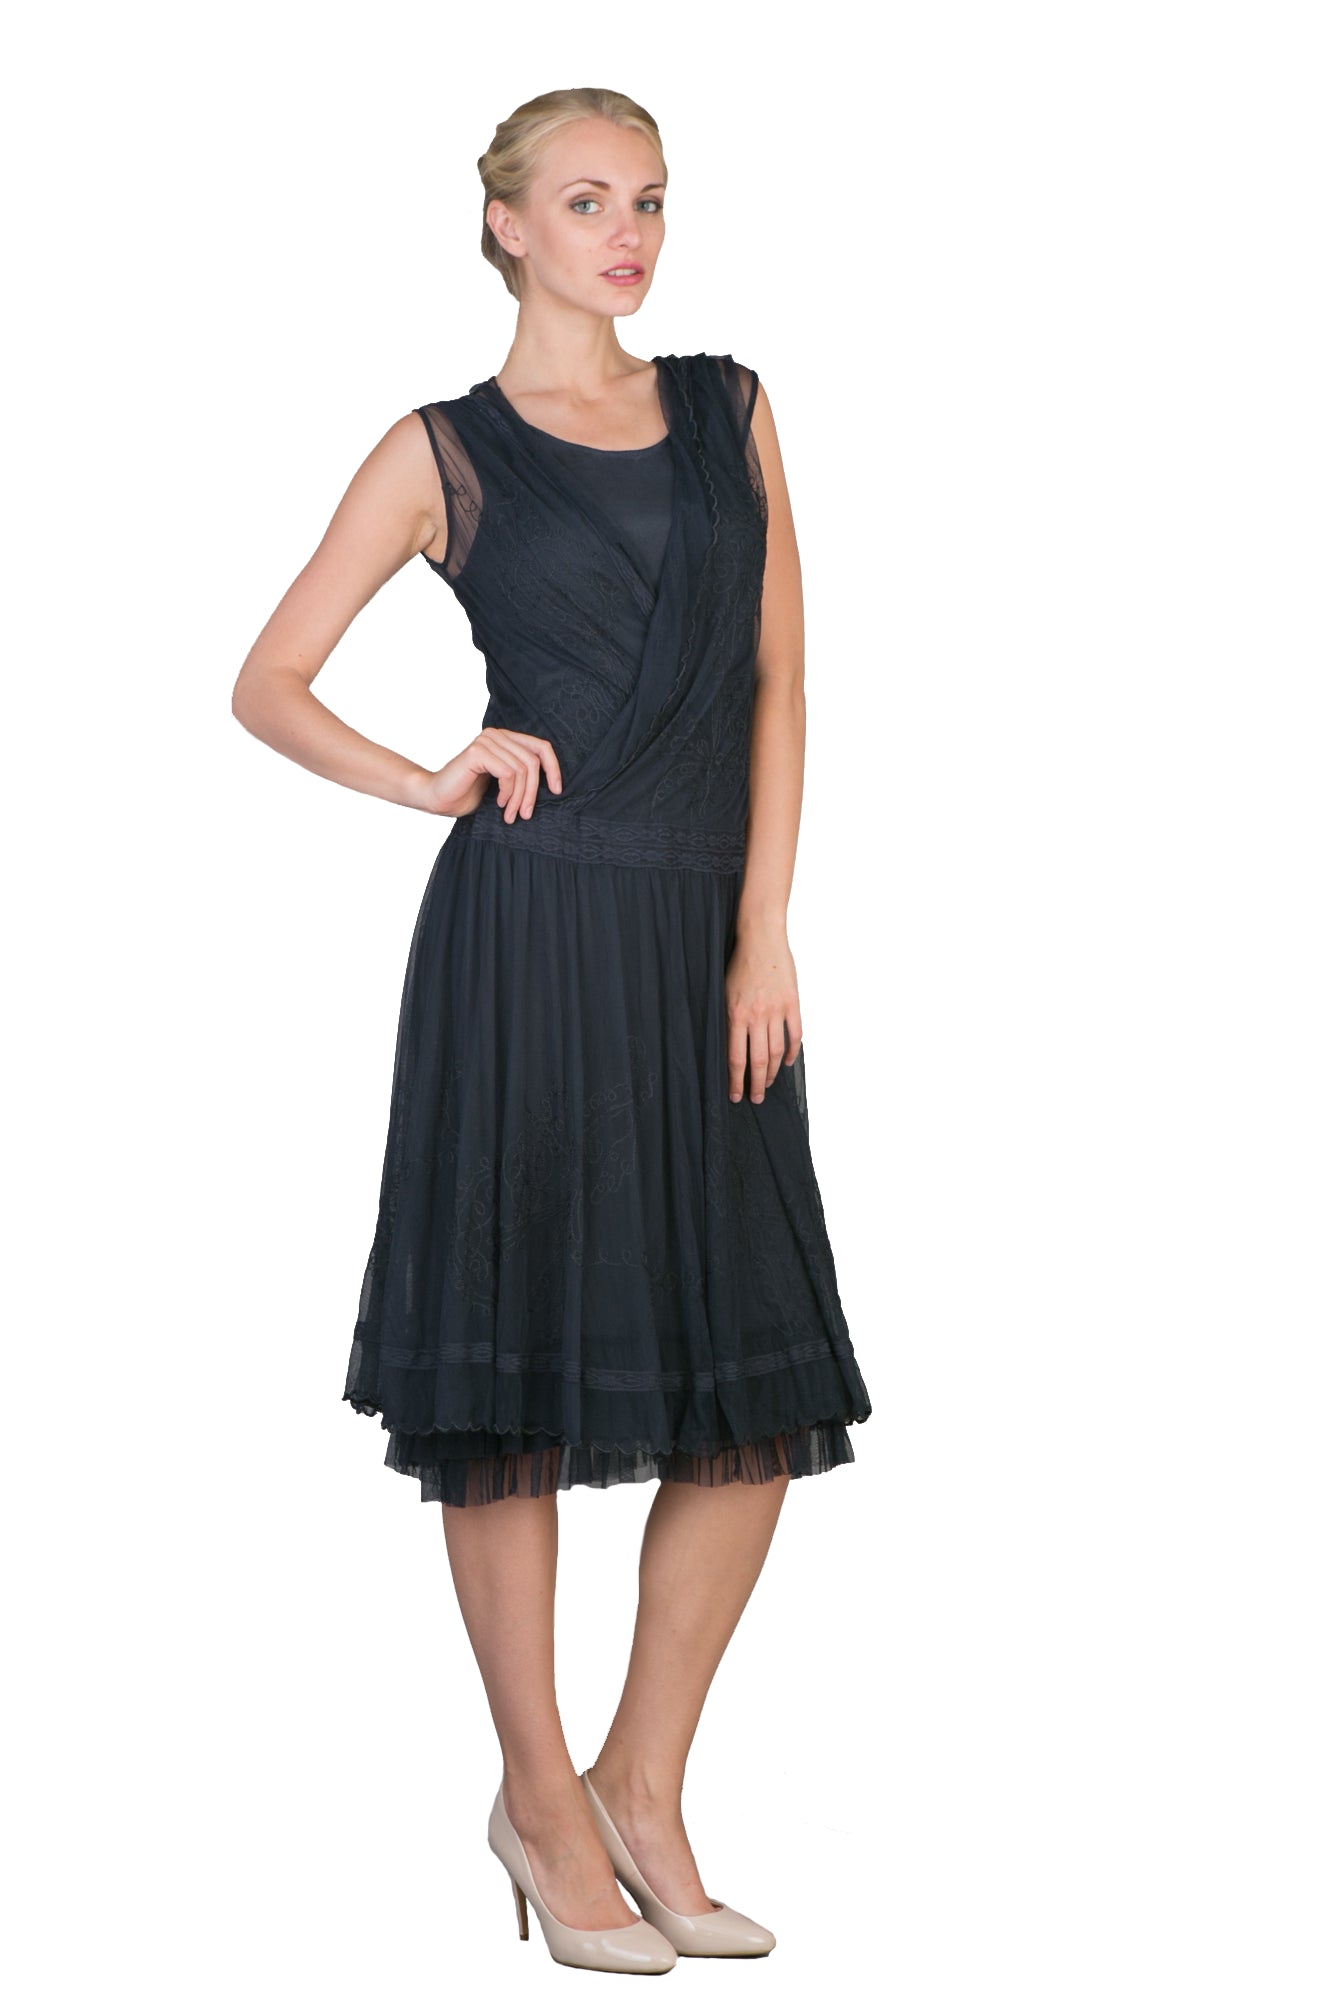 Casual Vintage Inspired Party Dress in Navy by Nataya - SOLD OUT